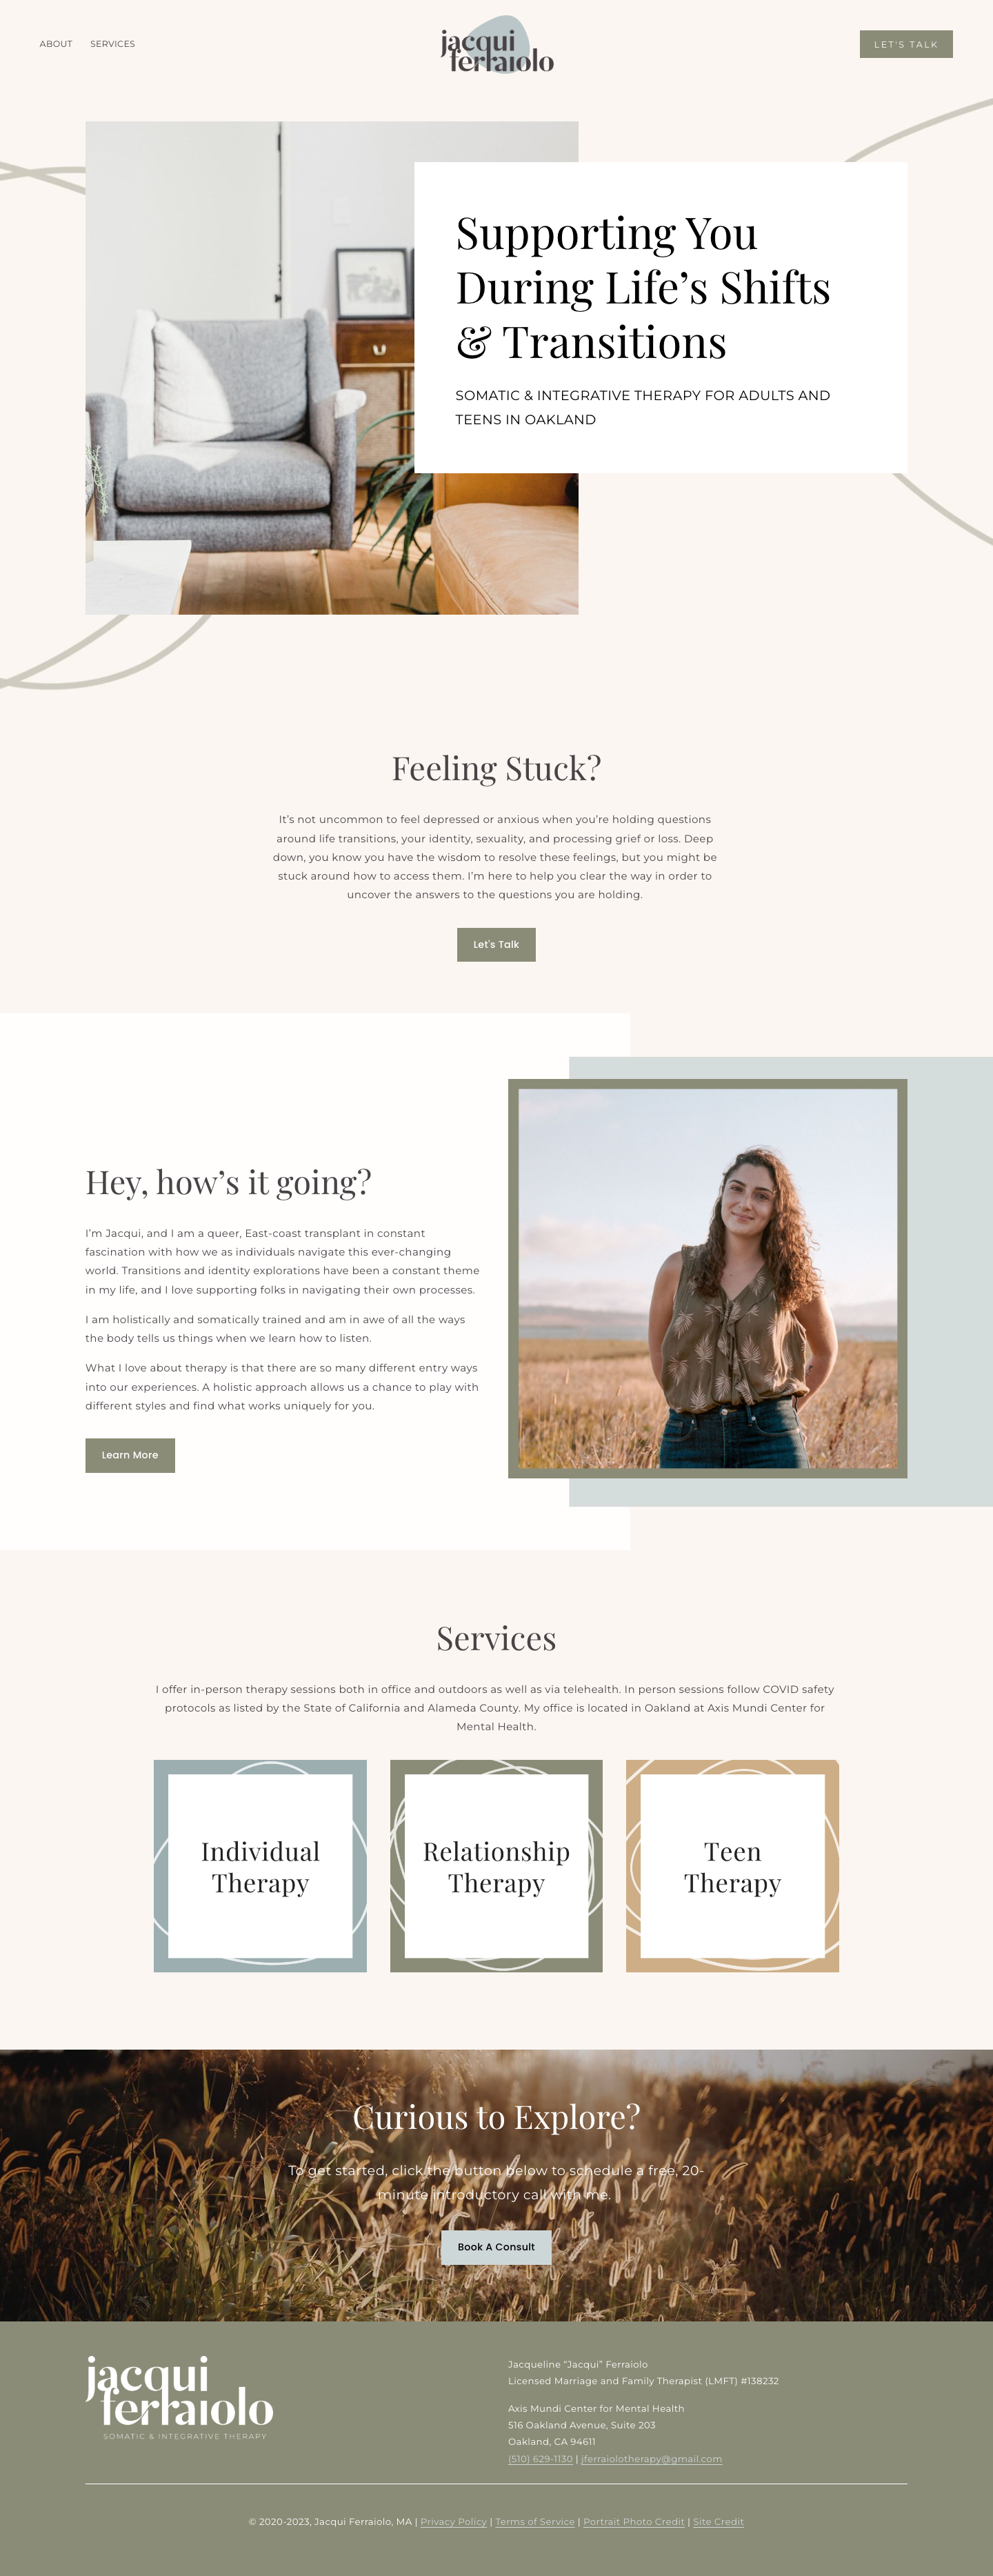 jacqui-ferraiolo-therapy-home-page.png